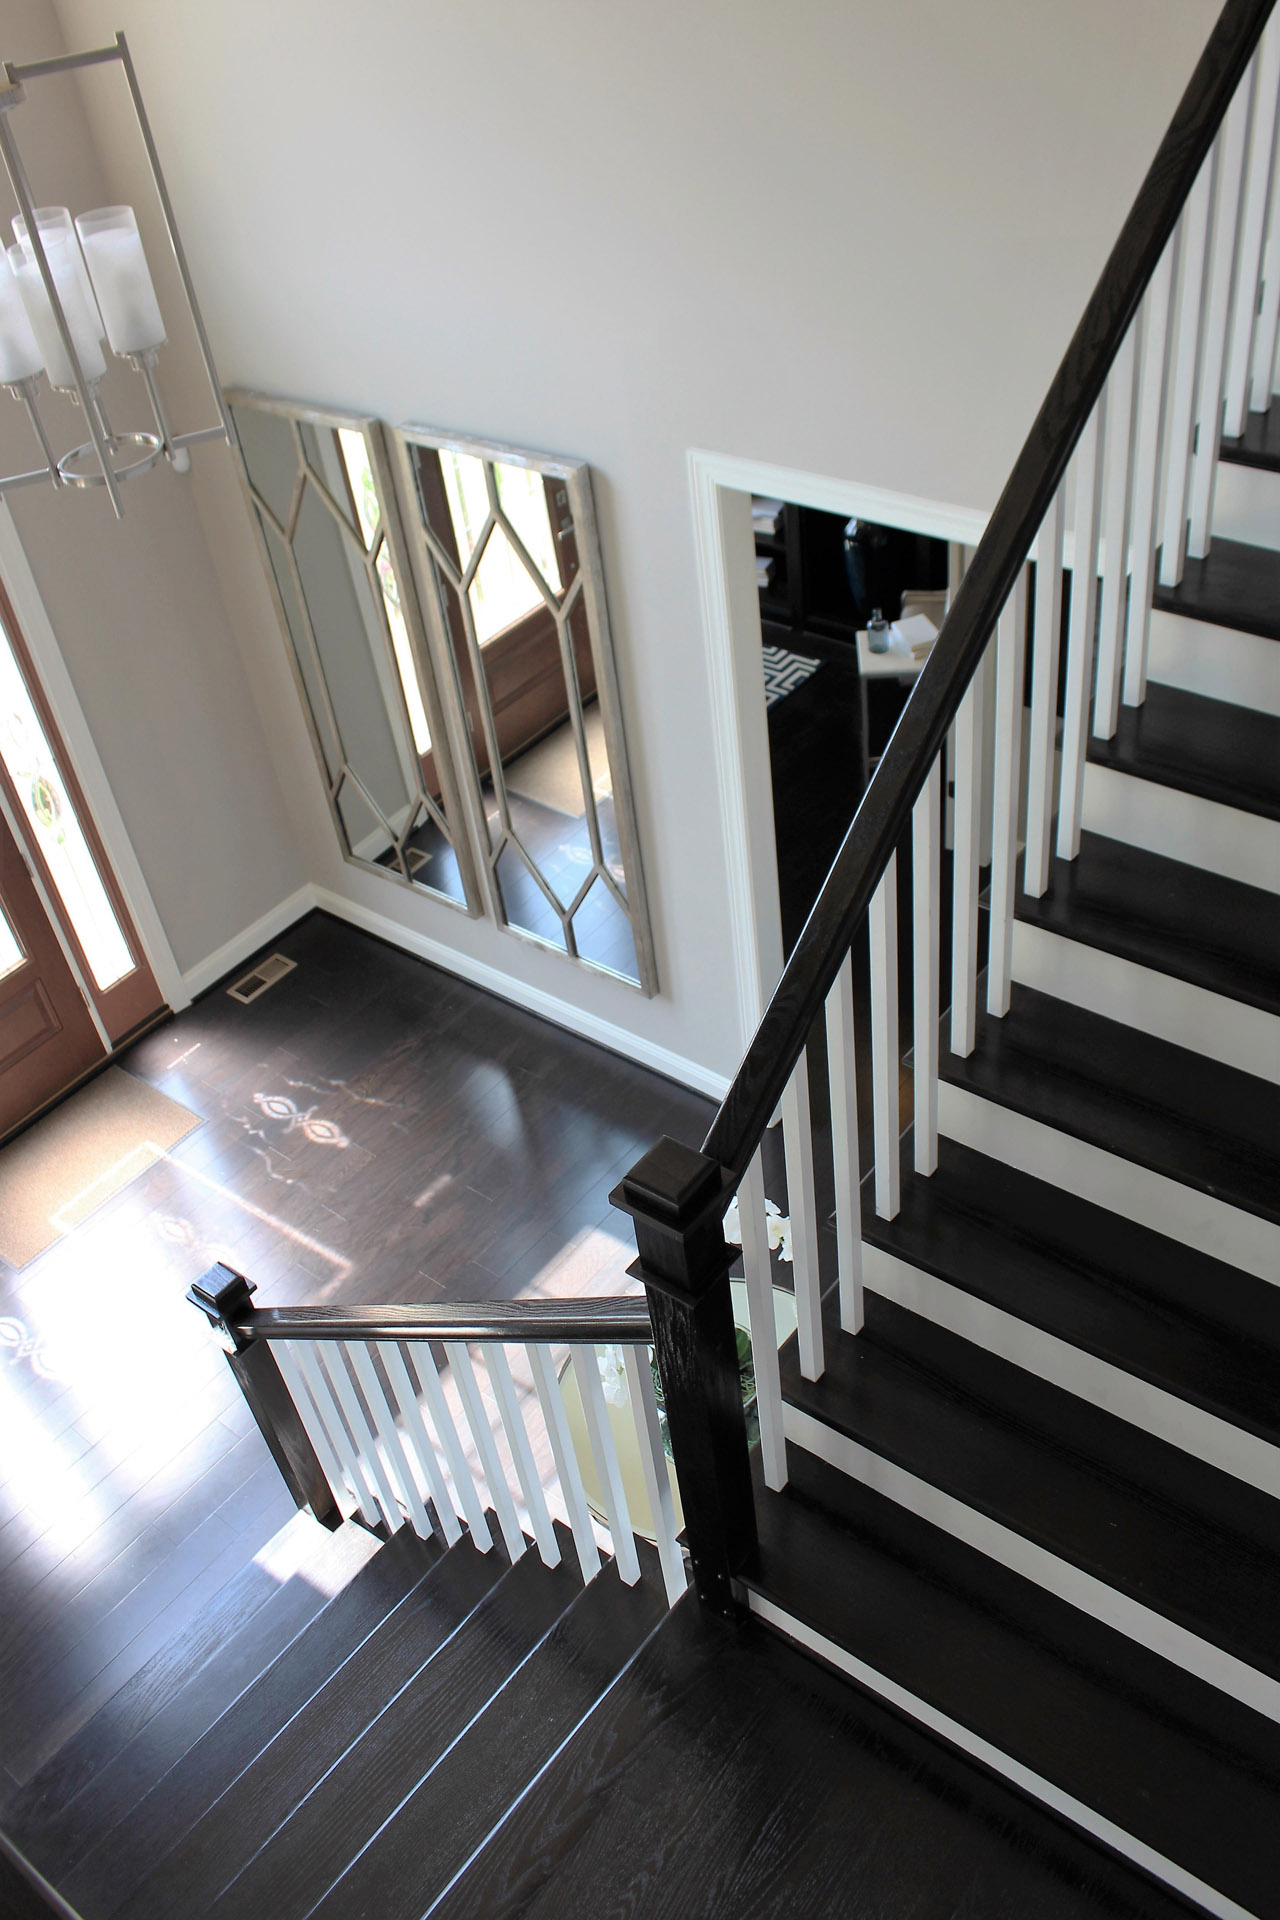 This showcases a completed loudoun stairs project within a home in northern virginia. This showcases the rails that they handmade. 